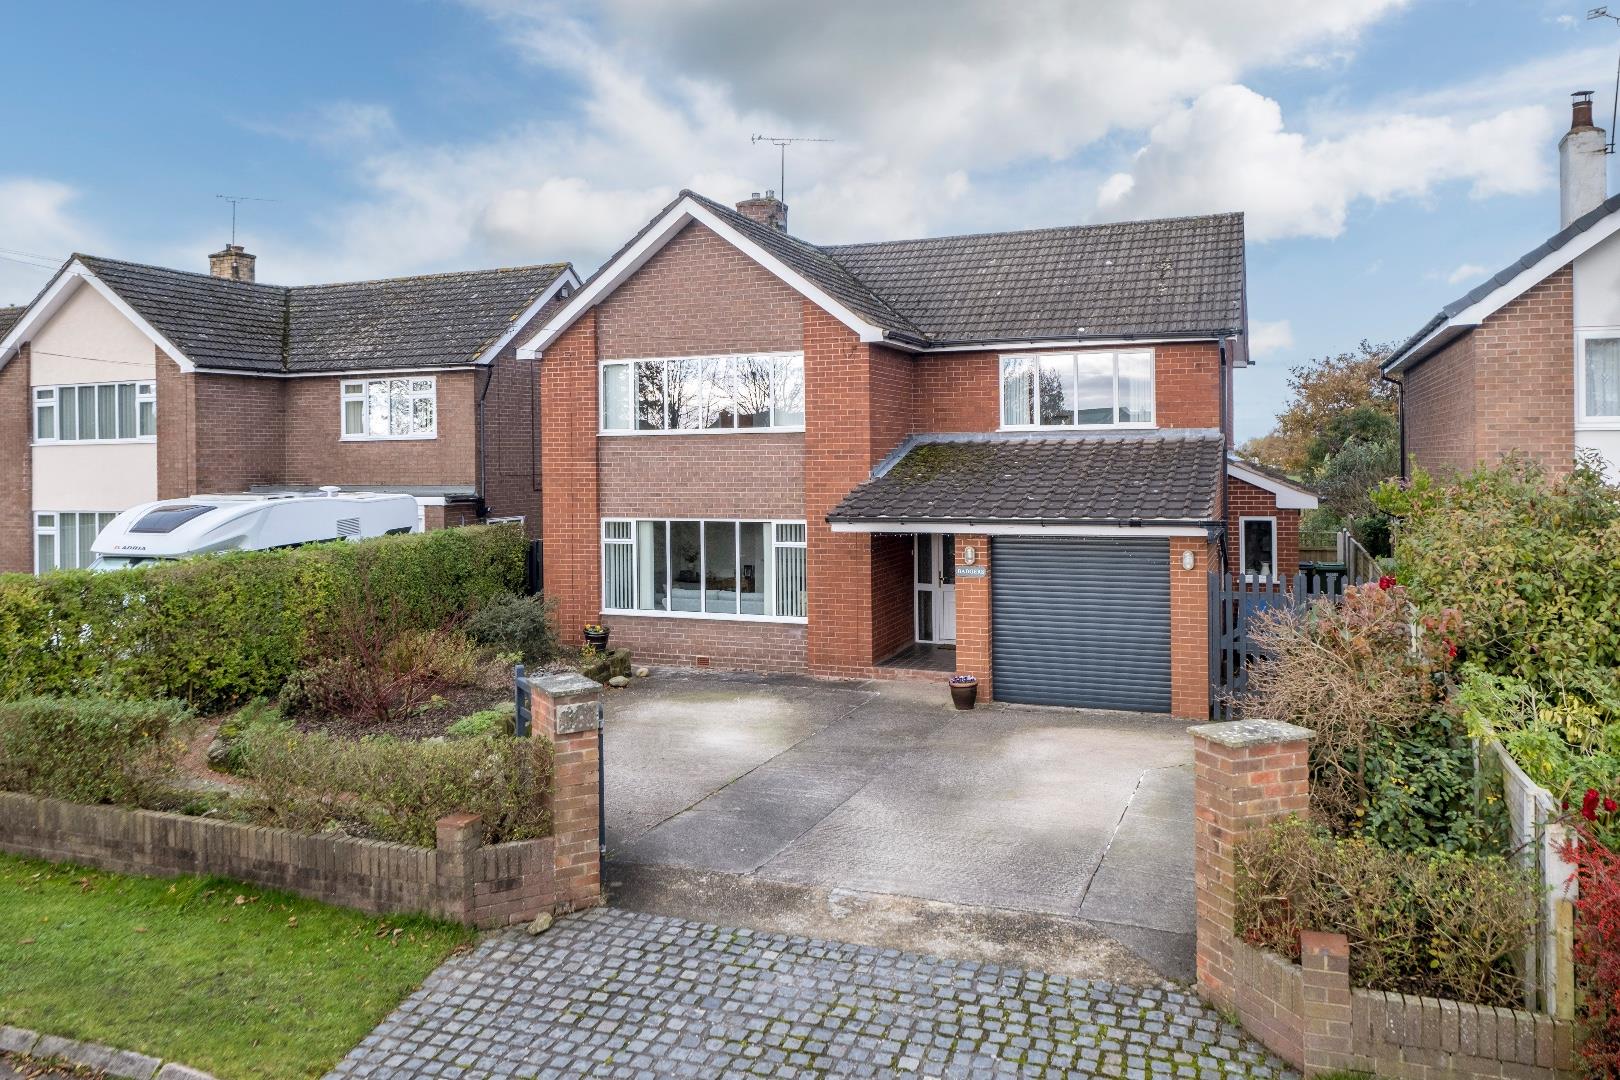 4 bedroom  Detached House for Sale in Oscroft